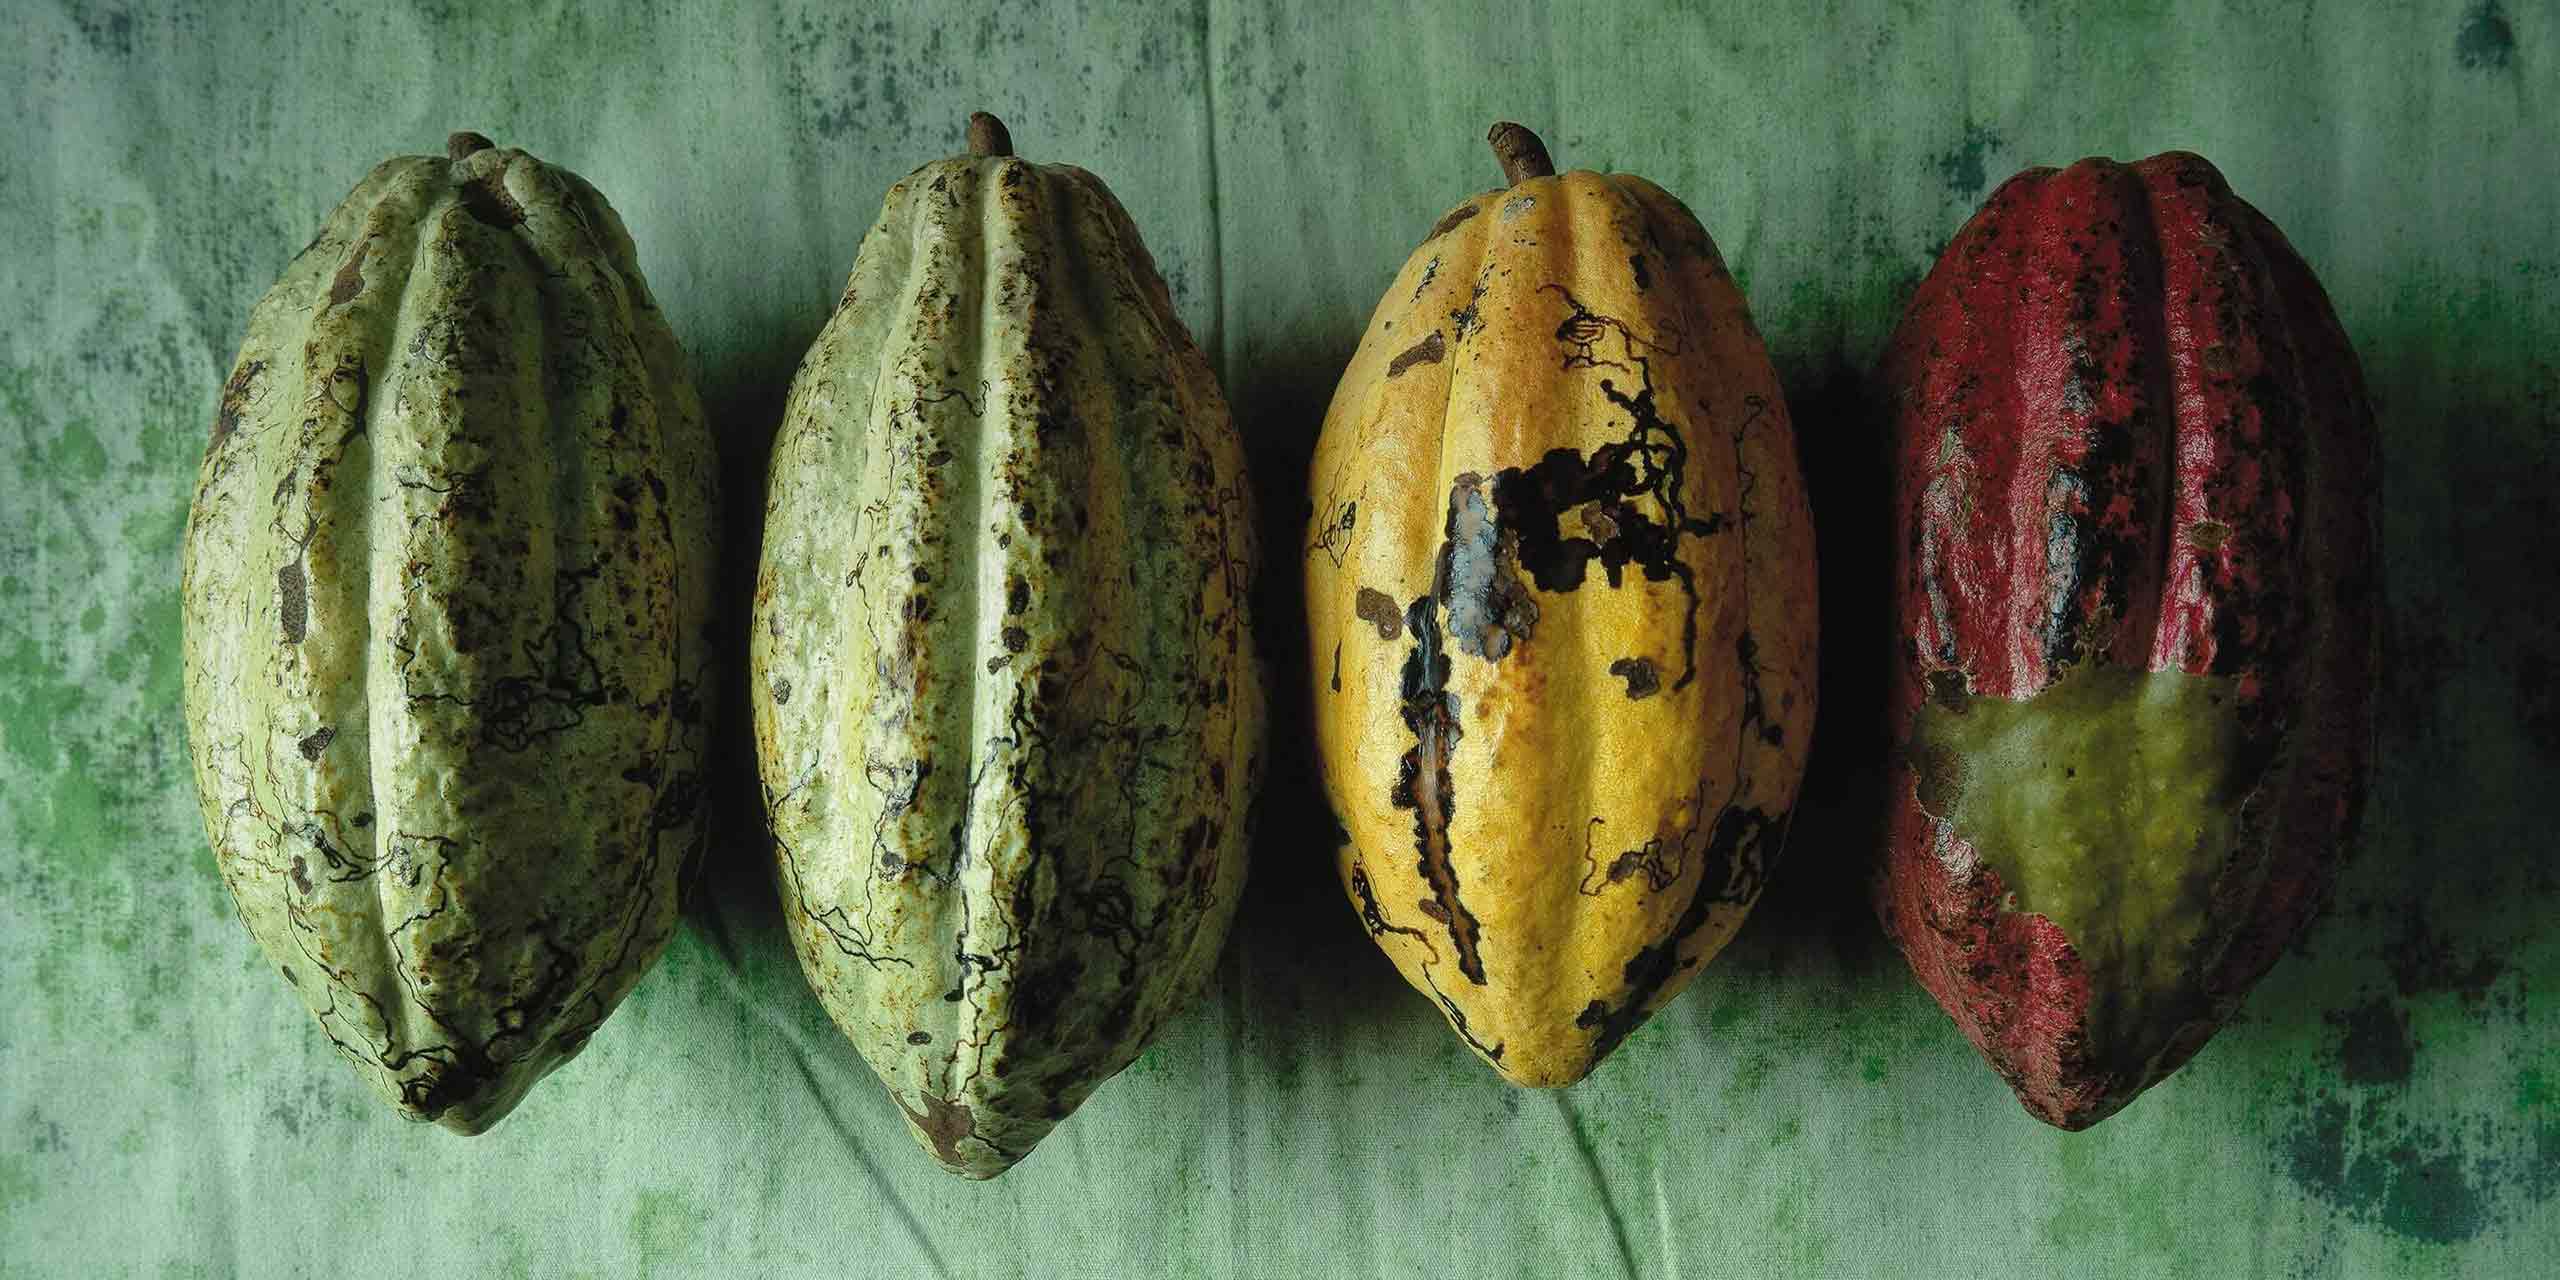 The journey of the cocoa